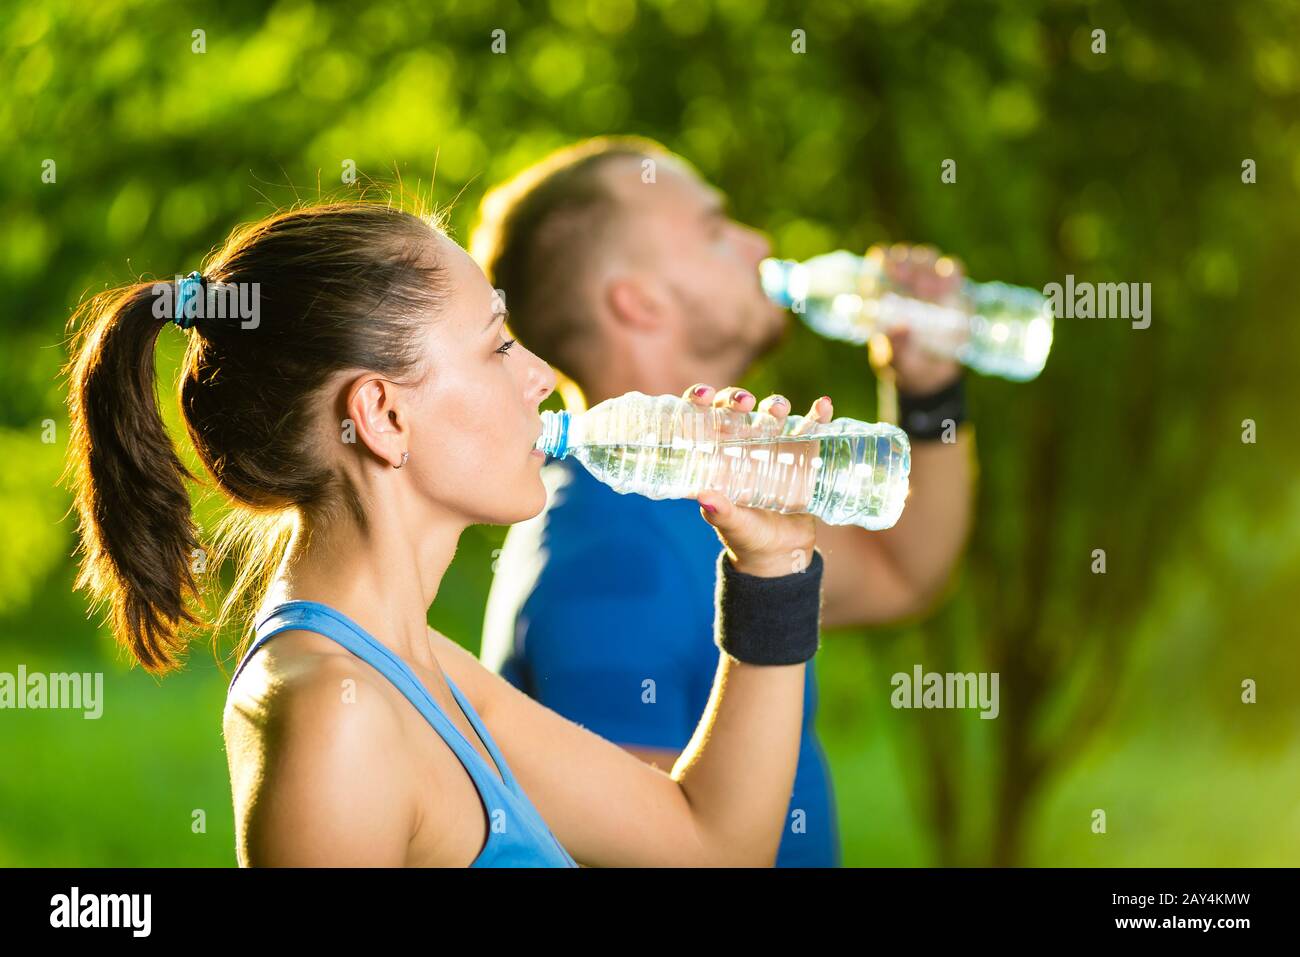 https://c8.alamy.com/comp/2AY4KMW/man-and-woman-drinking-water-from-bottle-after-fitness-sport-exercise-2AY4KMW.jpg